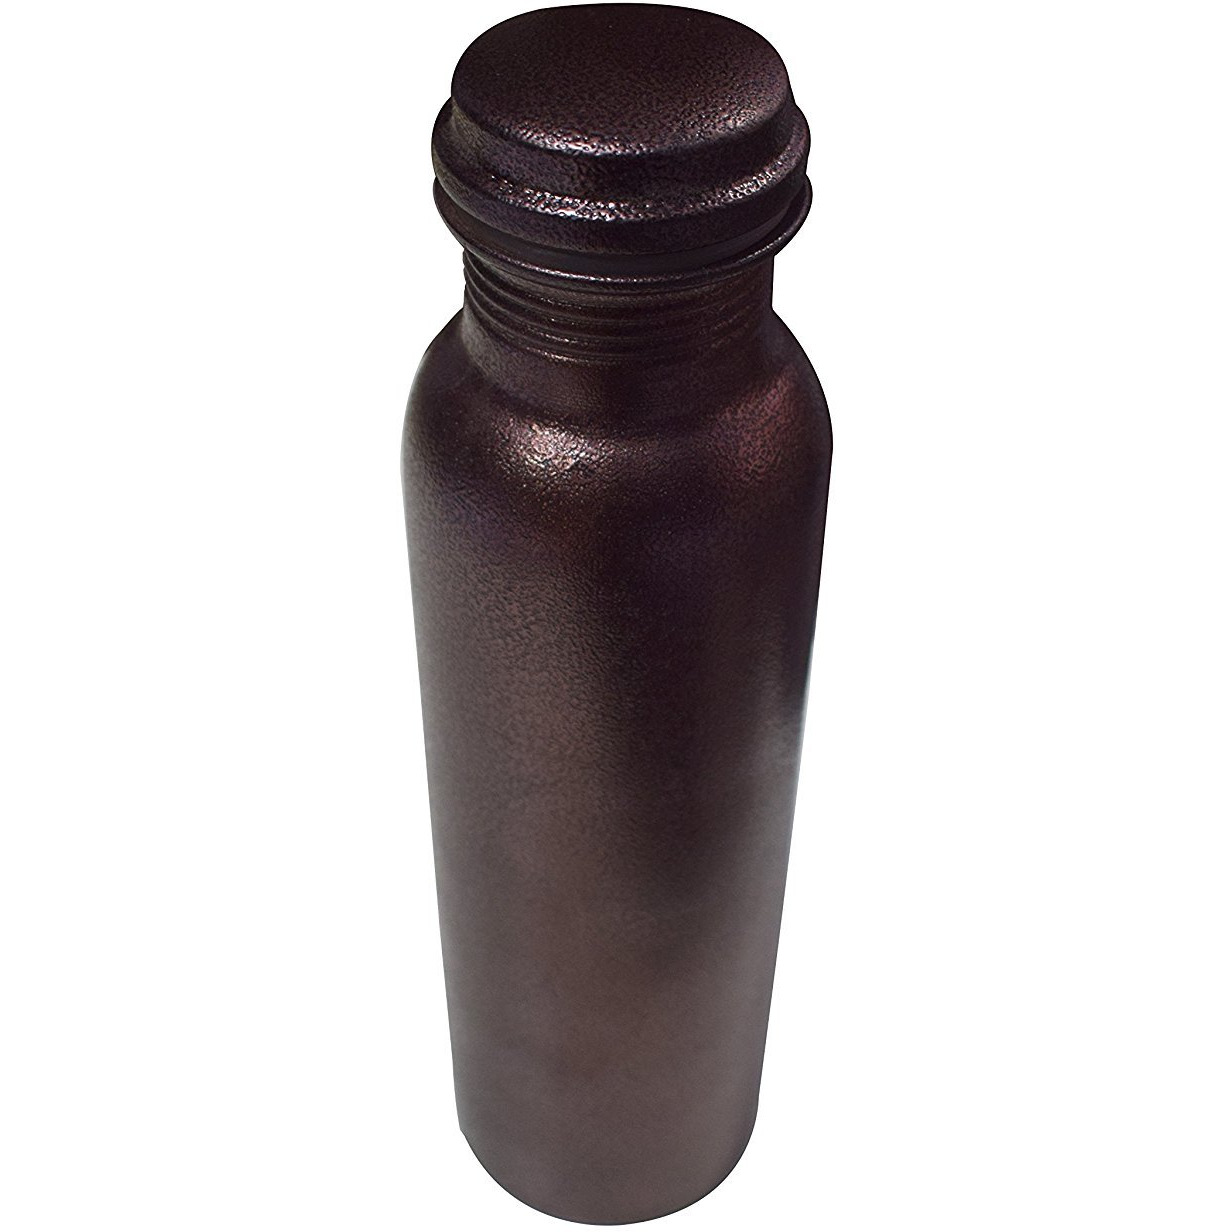 Winmaarc  Pure Copper Antique  Printed Water Bottle for Ayurvedic Health Benefits Joint Free Leak Proof (copper, 900 ml)